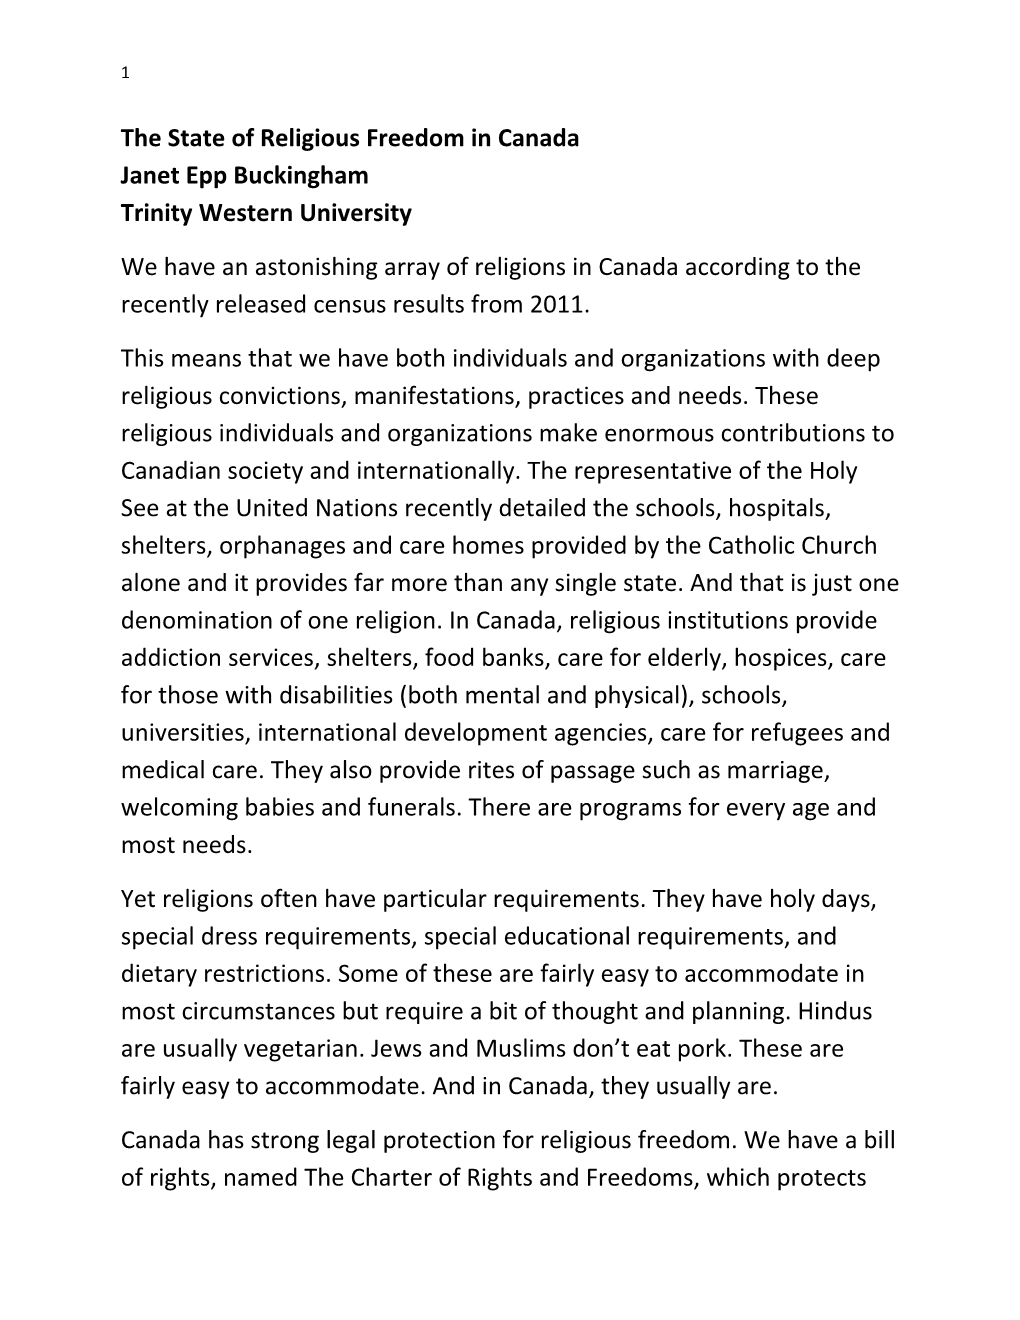 We Have an Astonishing Array of Religions in Canada According to the Recently Released